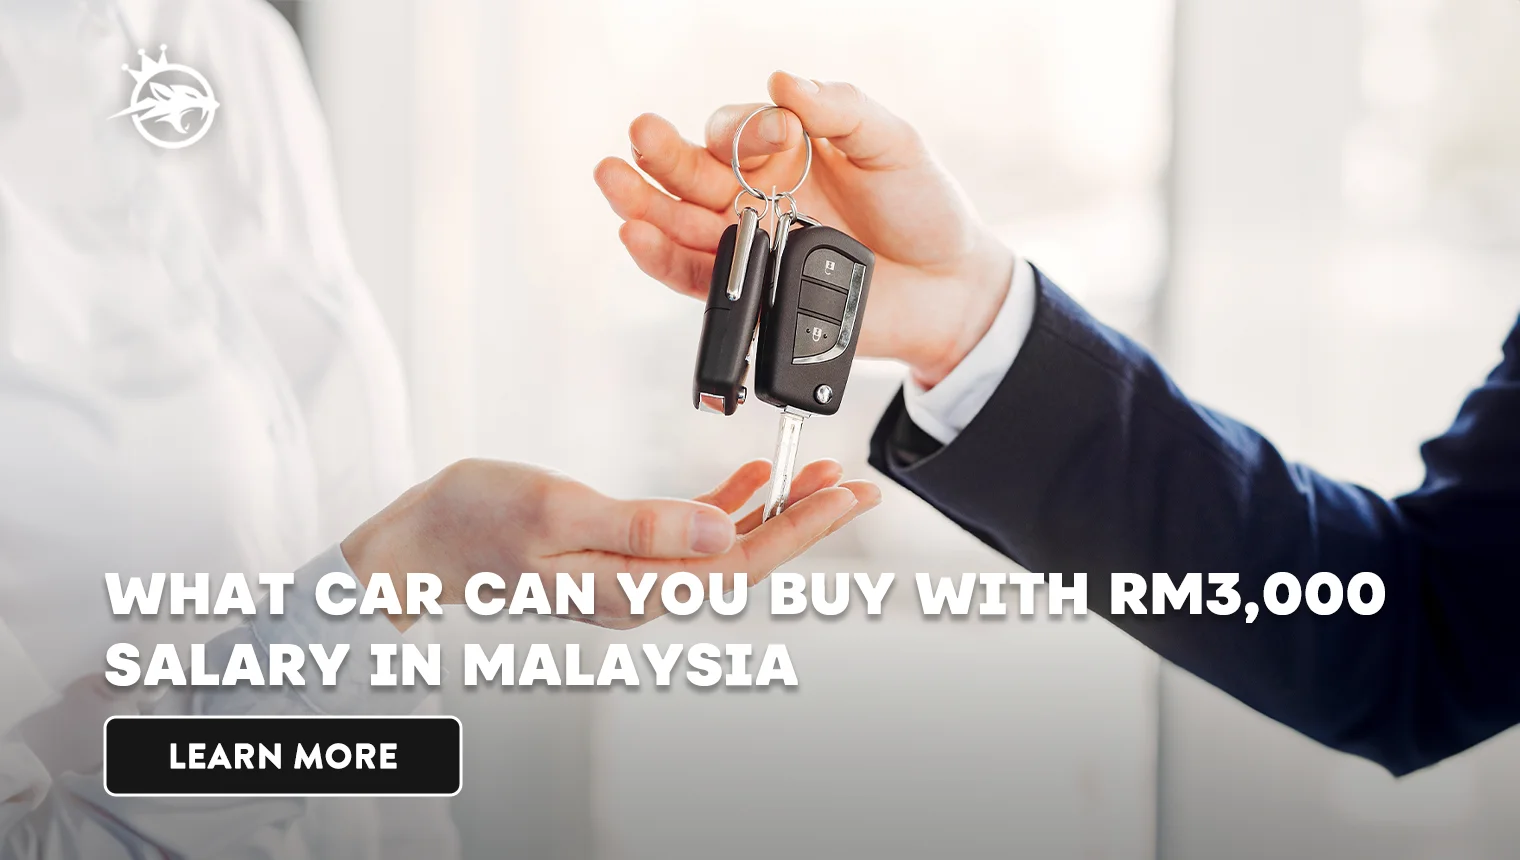 What Car Can You Buy With RM3,000 Salary in Malaysia